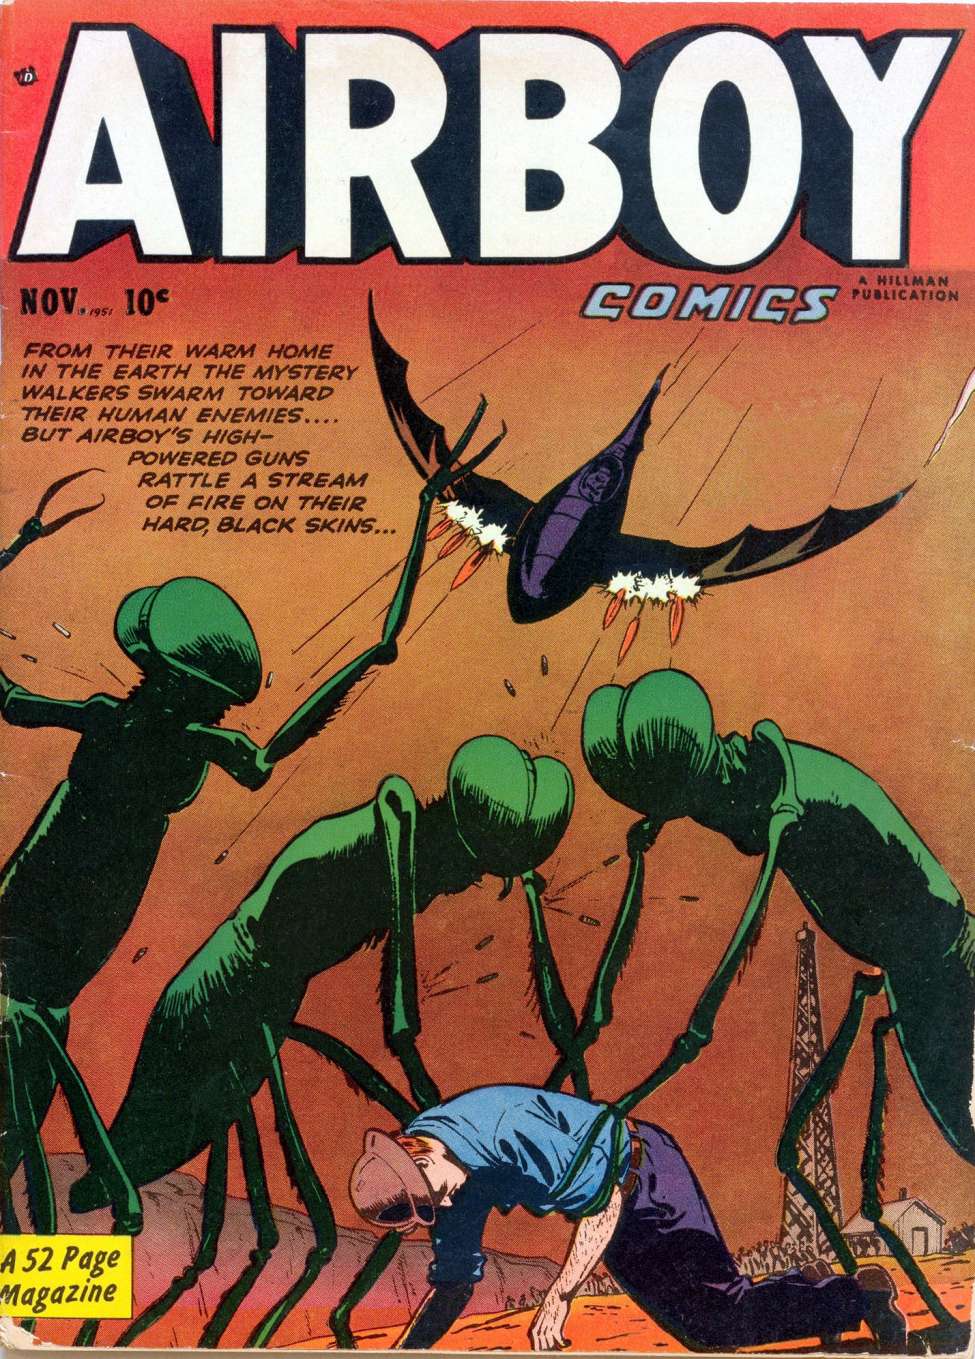 Book Cover For Airboy Comics v8 10